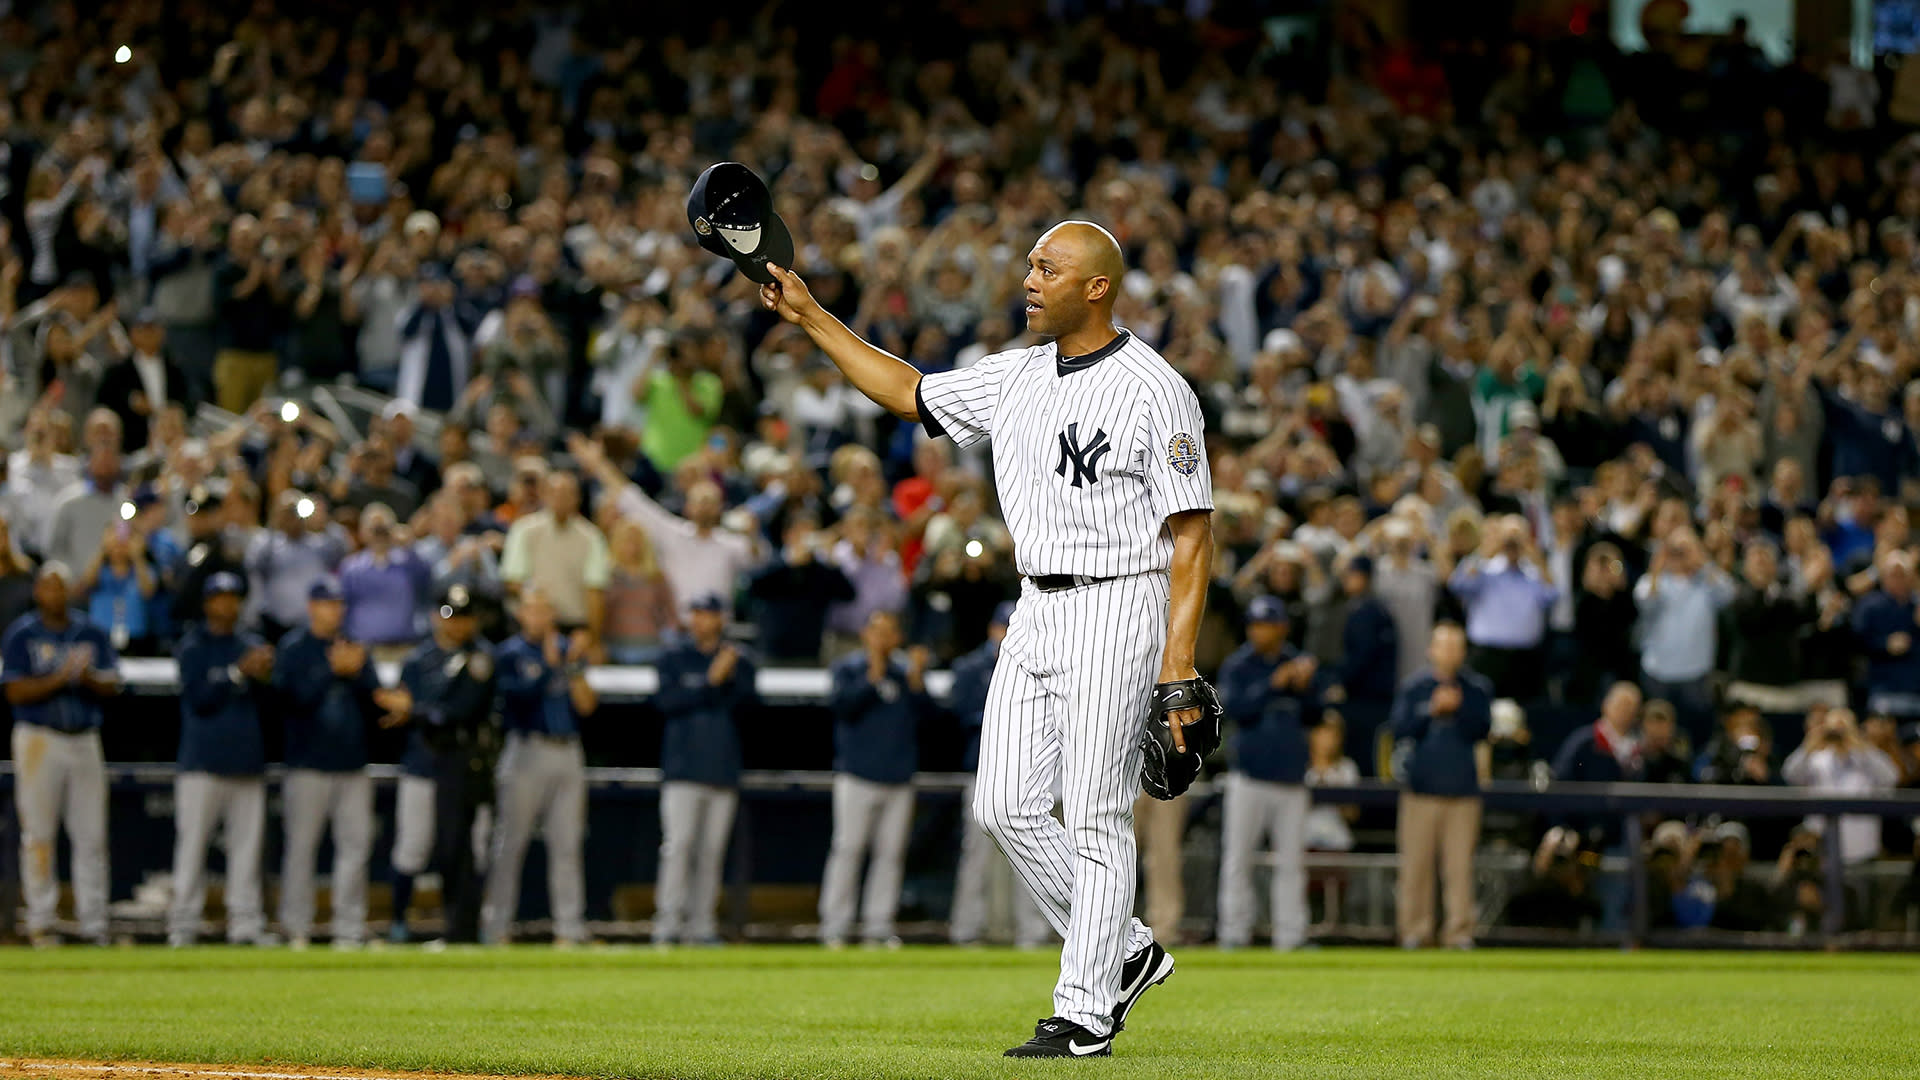 Even in his rare failures, Mariano Rivera was a Hall of Famer